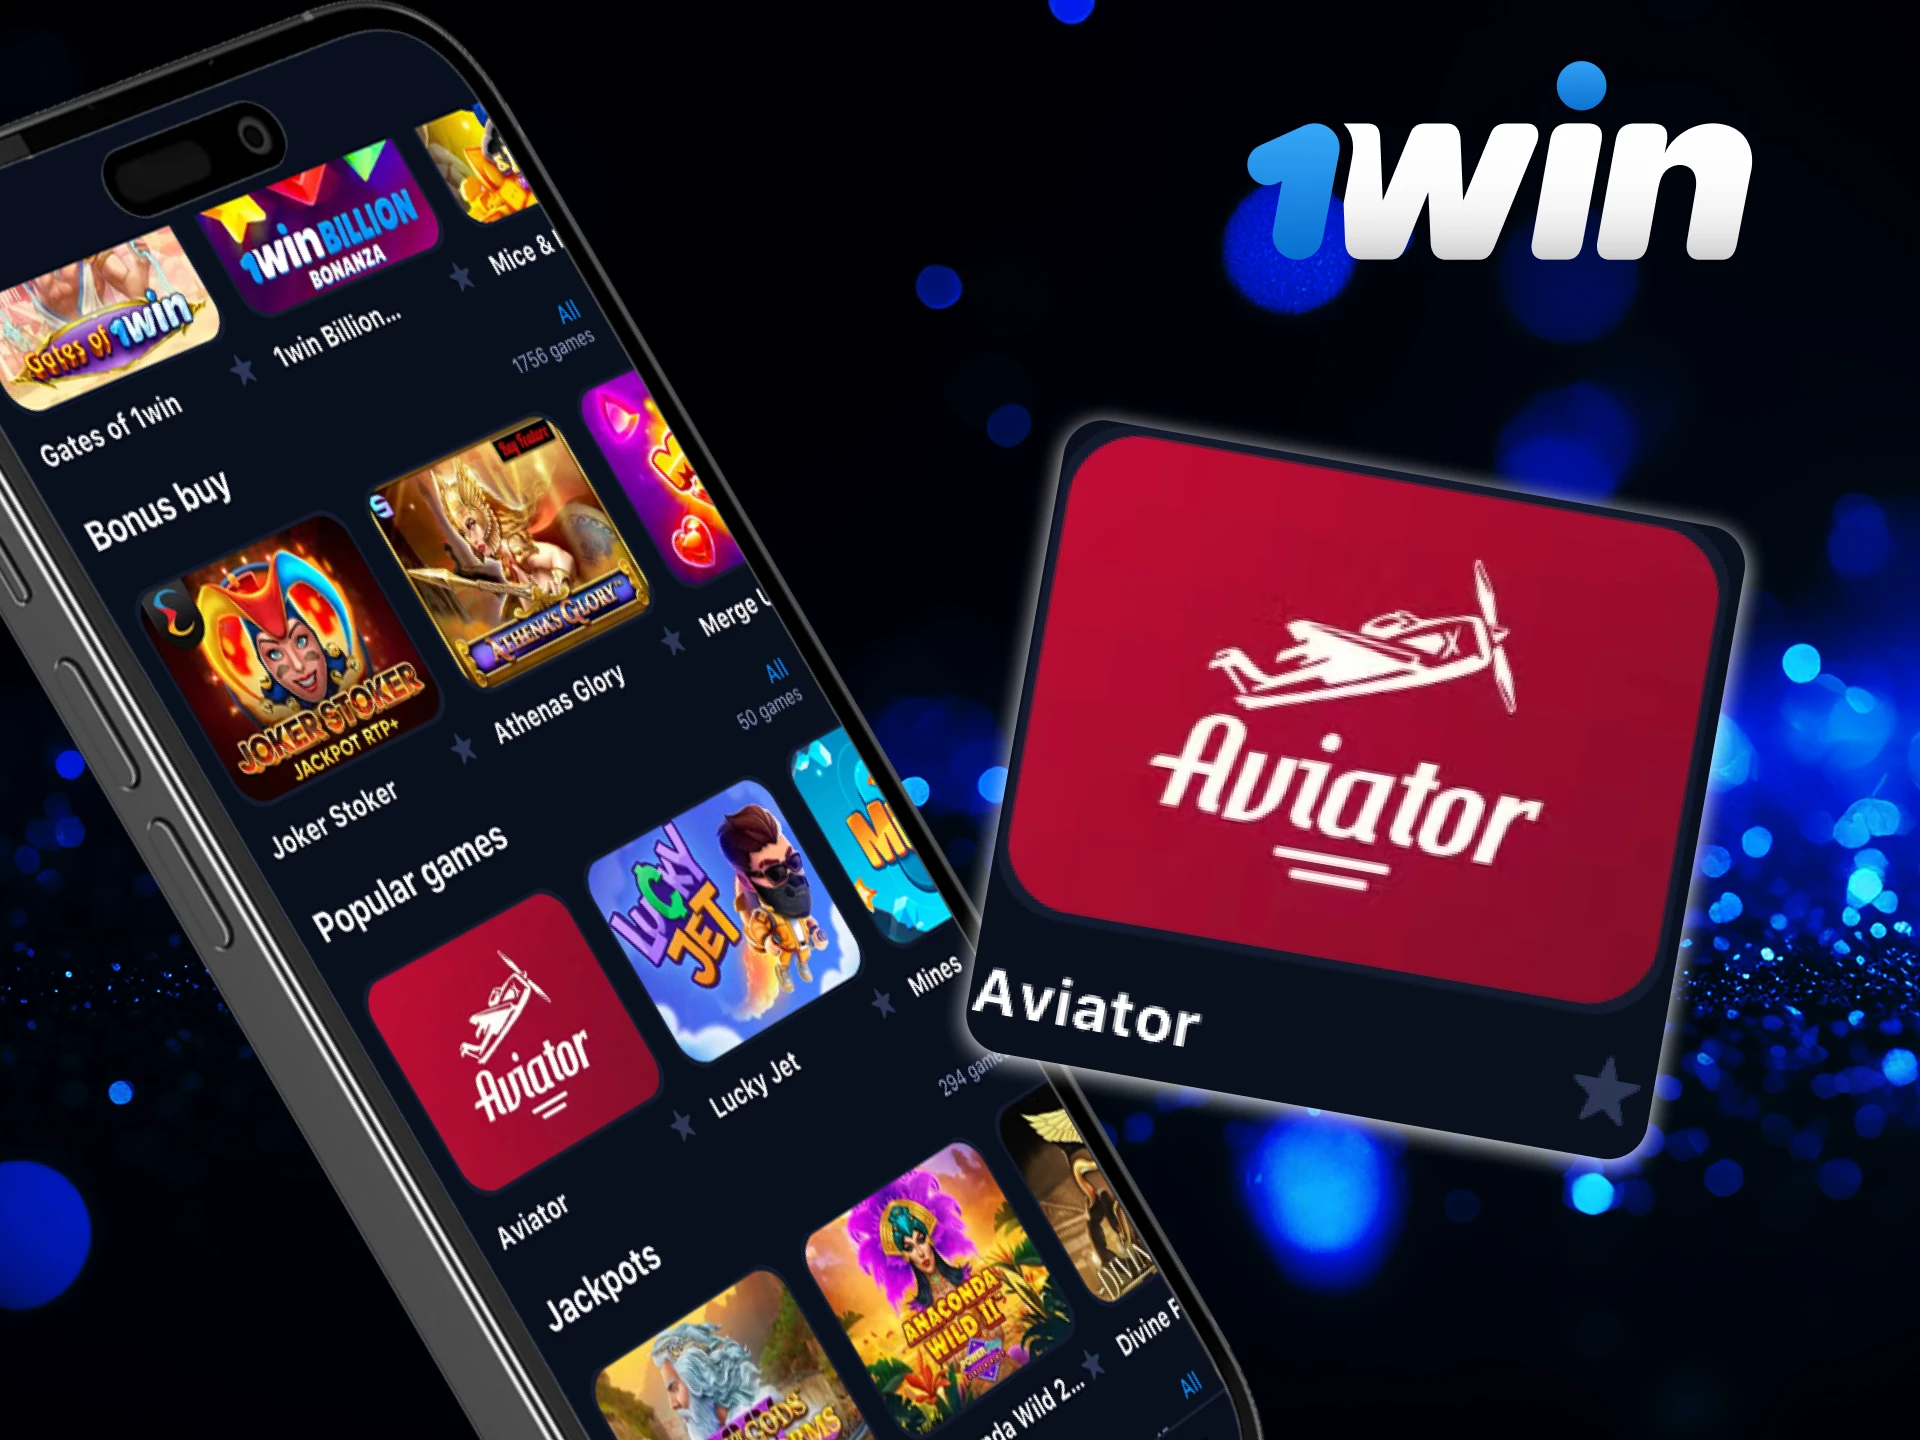 Instructions on how to find the Aviator crash game in the 1Win casino mobile application.